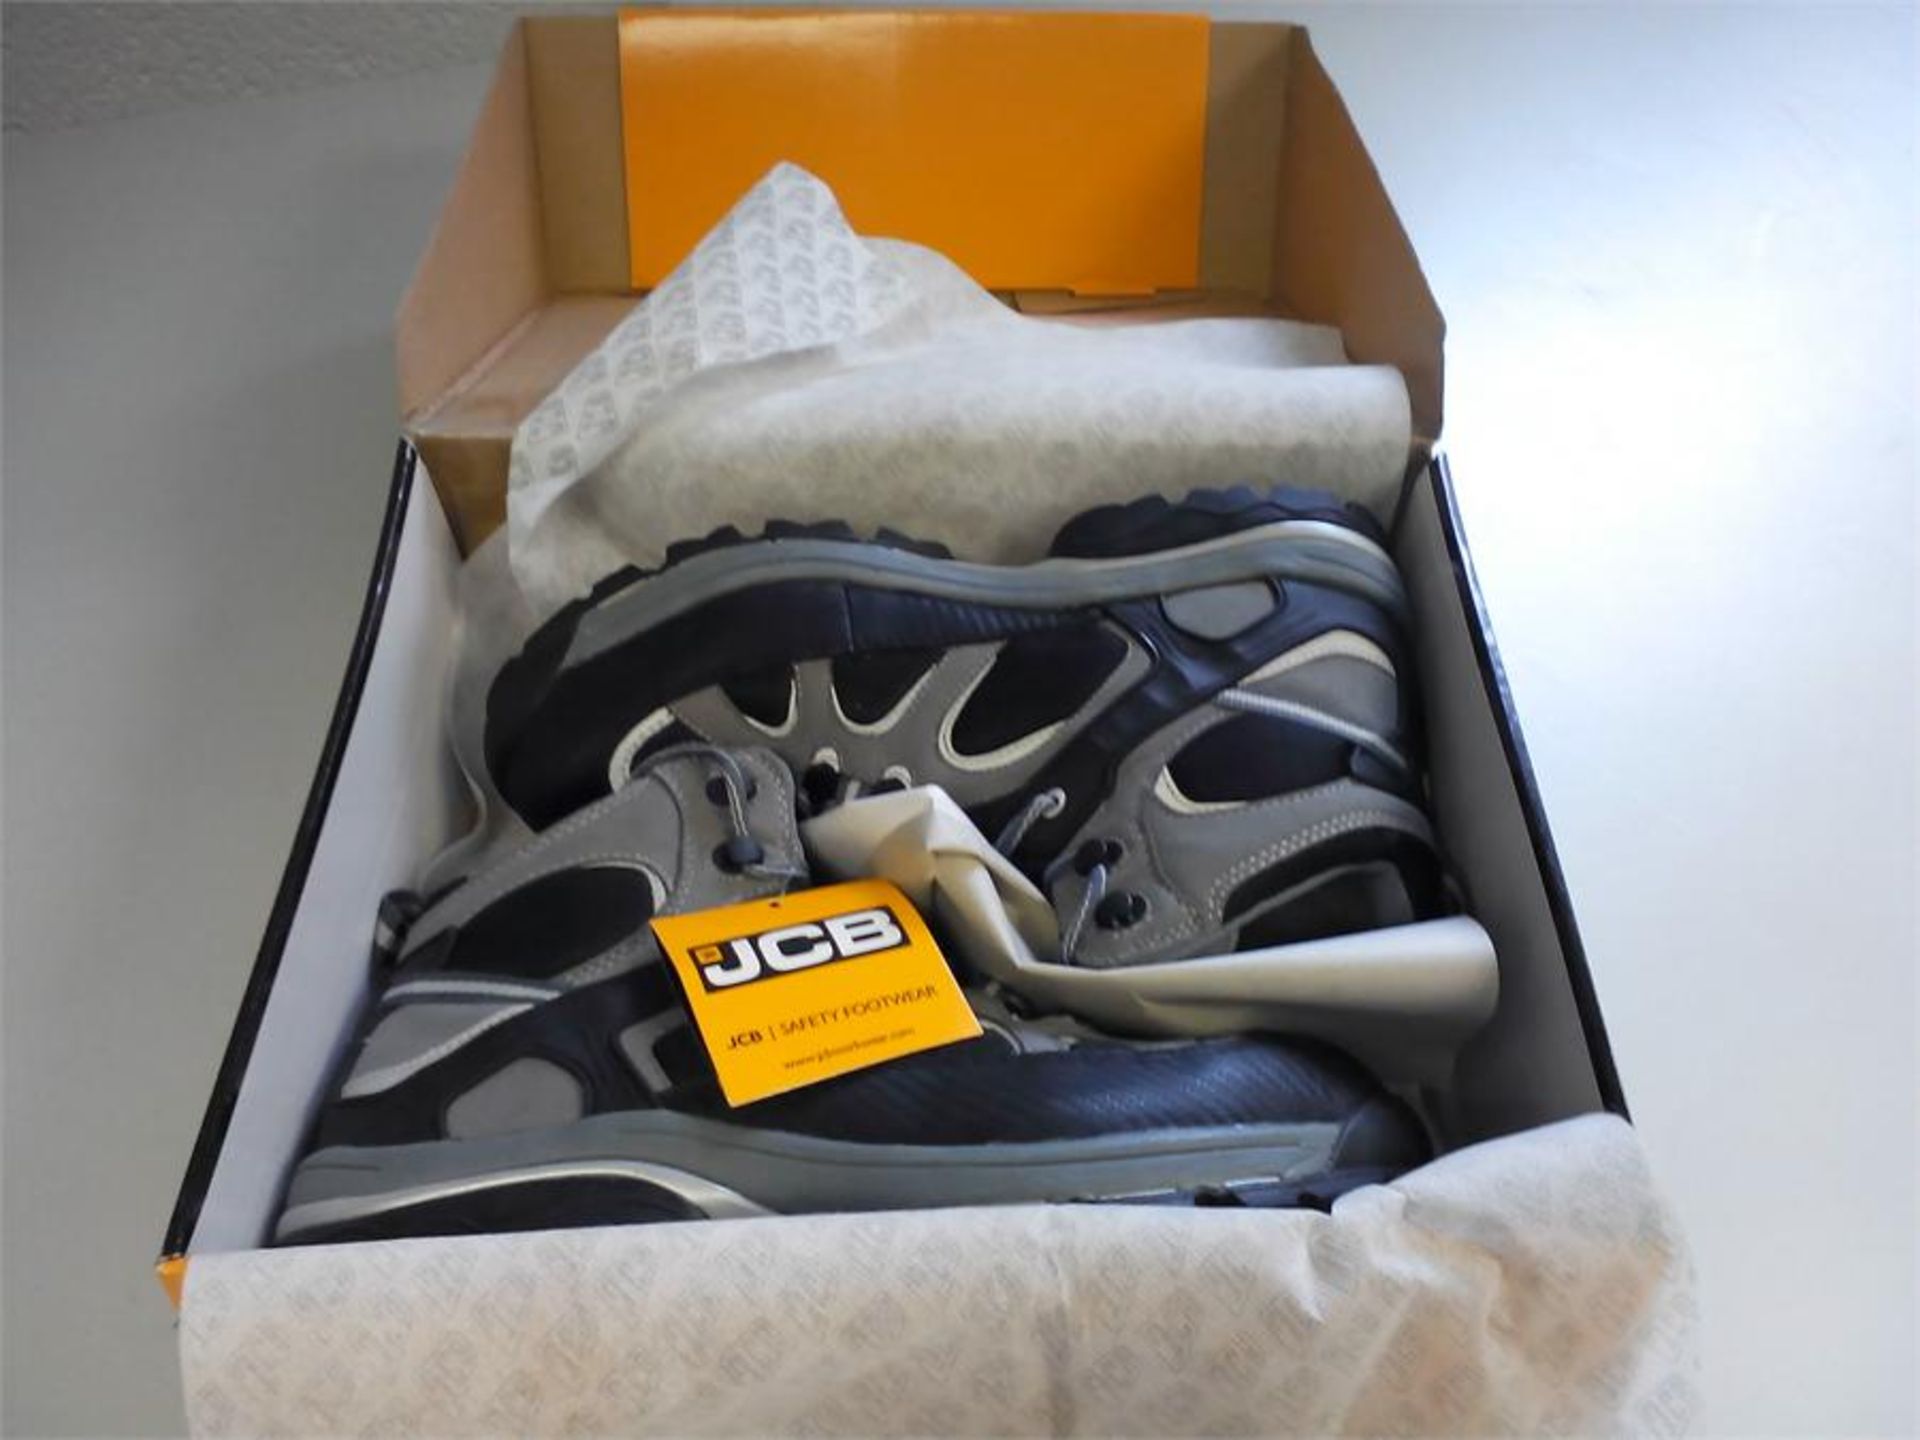 JCB Safety Boots NEW Boxed - RRP £40 - UK Size 10 / USA 11 / EURO 44 - Grey/Black Microfiber/Mesh - Image 2 of 2